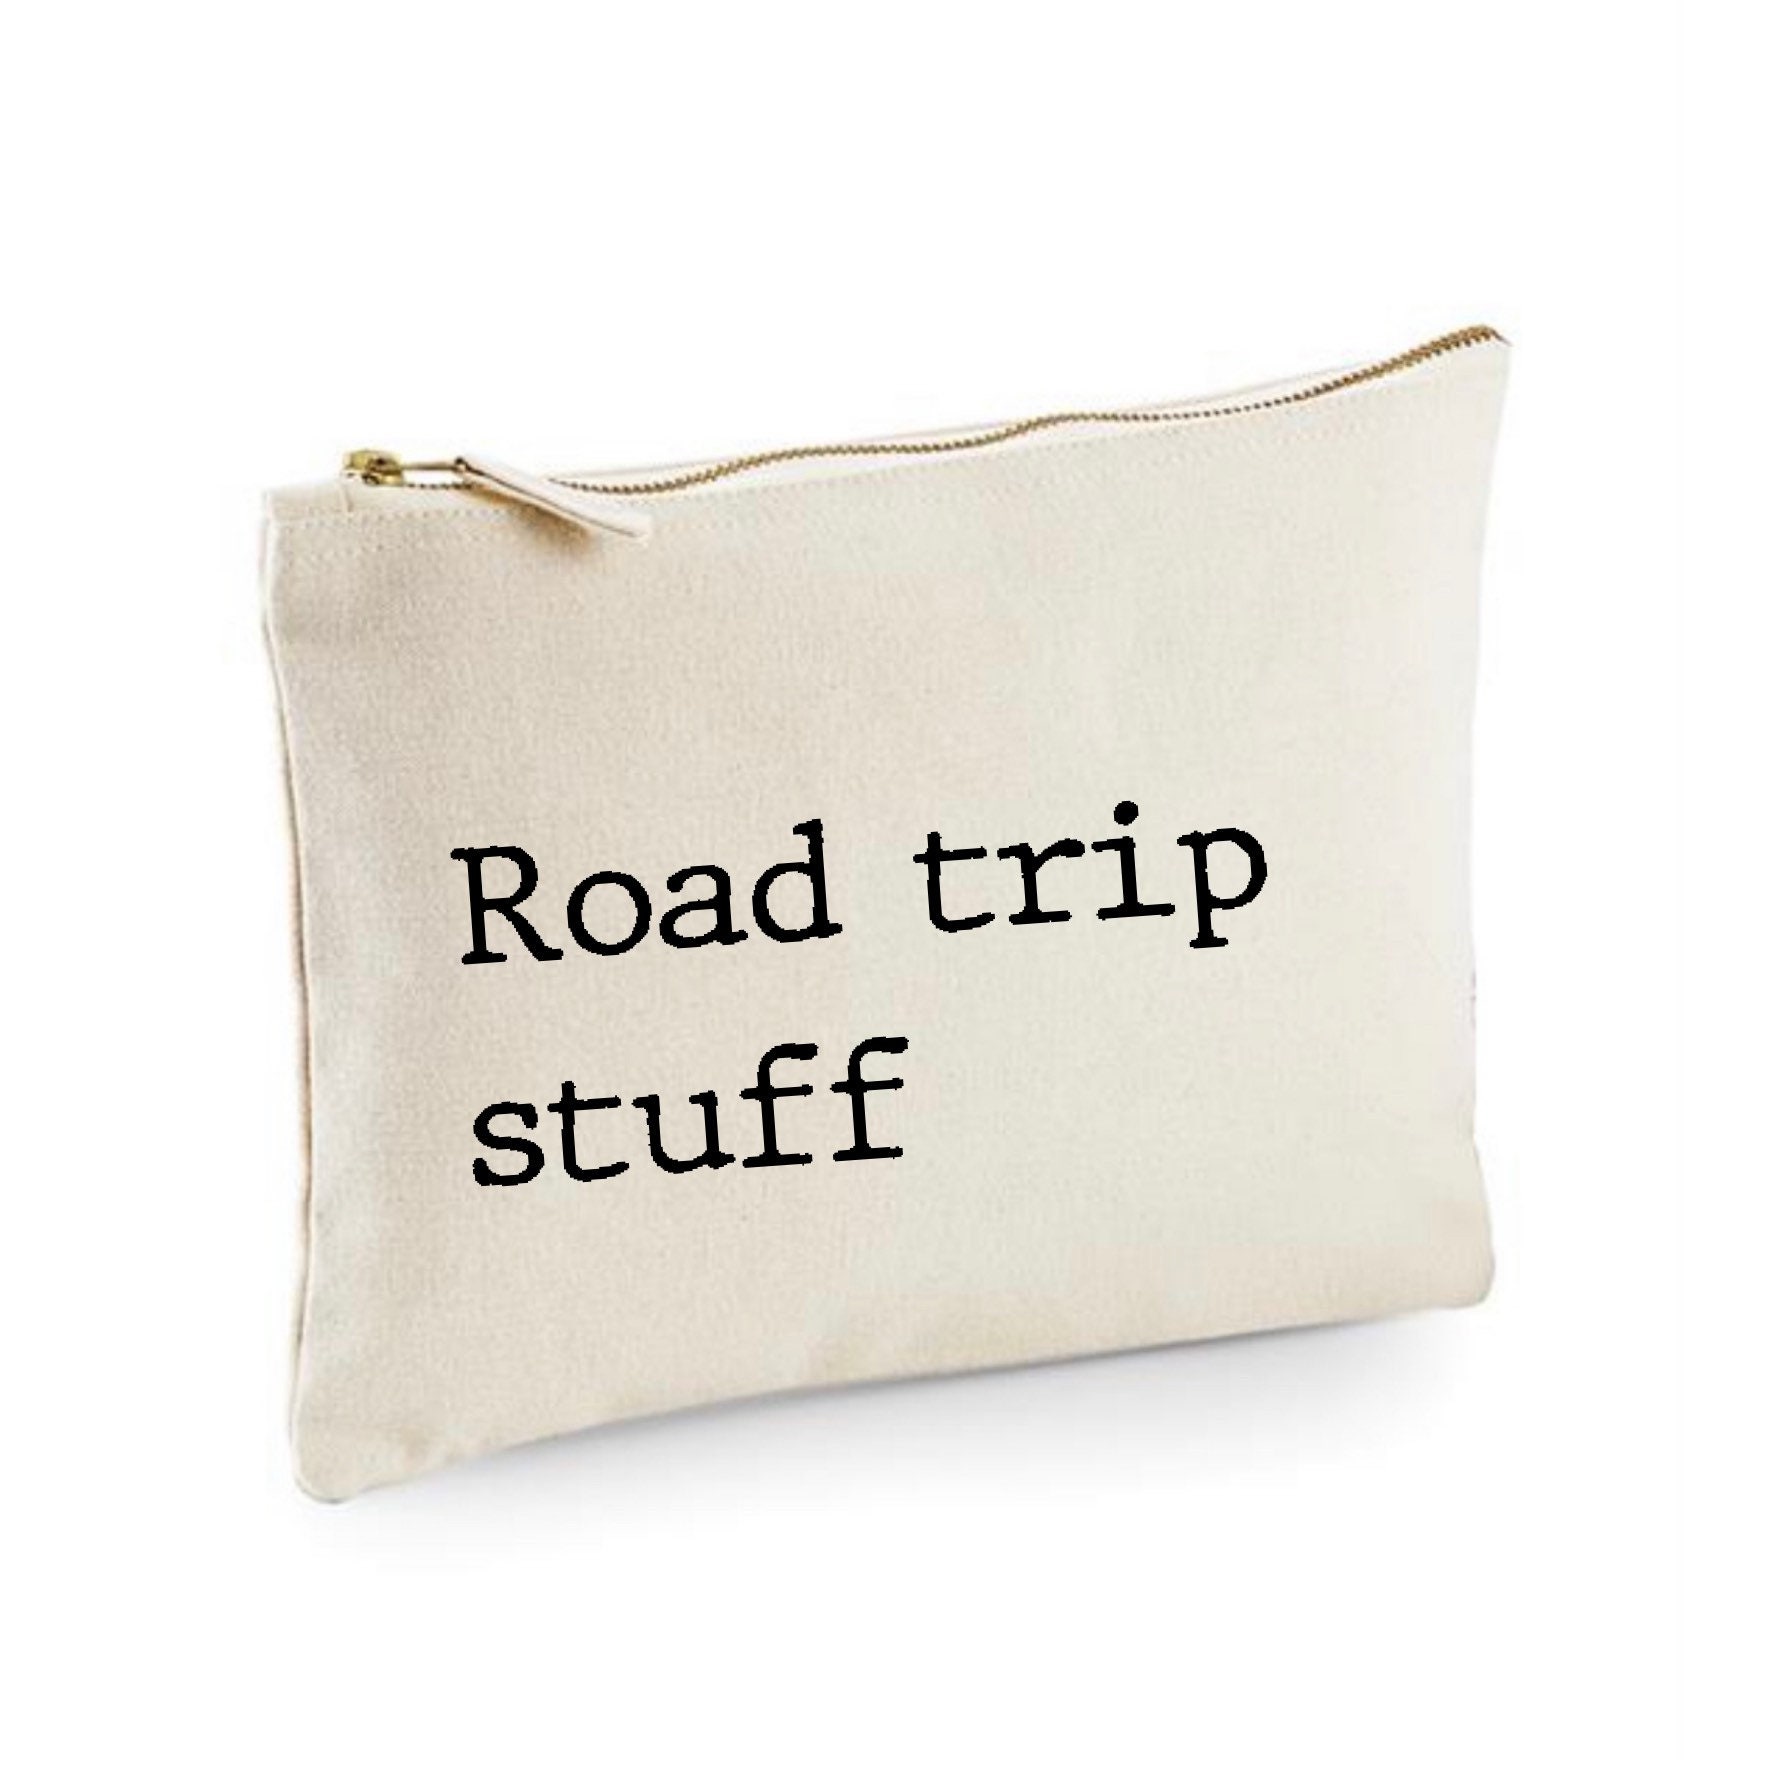 This Shopper-Loved Purse Holder Is Great for Road Trip Snacks—and It's on  Sale